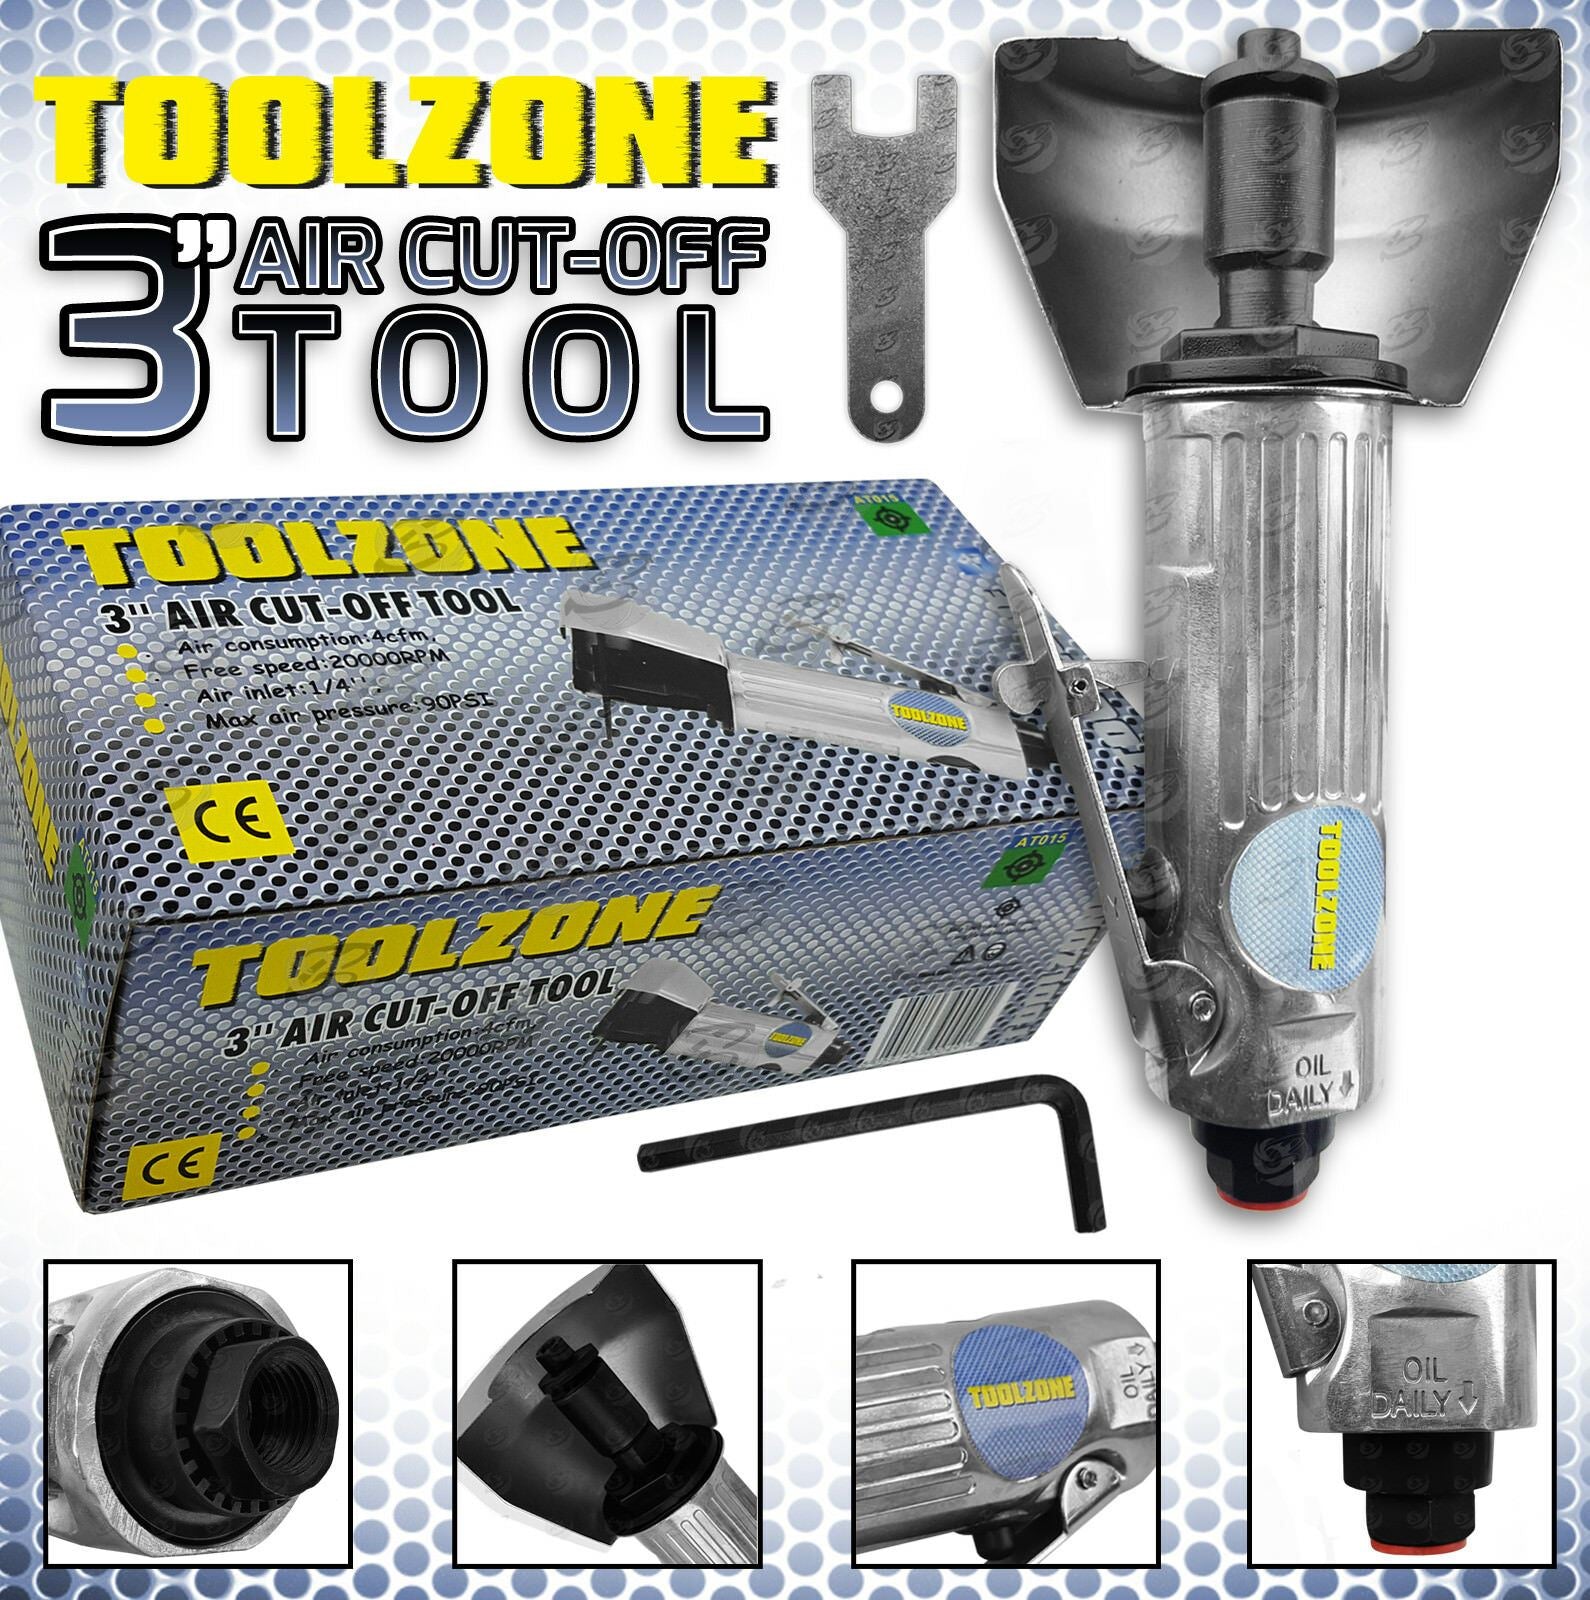 TOOLZONE 3" AIR CUT OFF TOOL